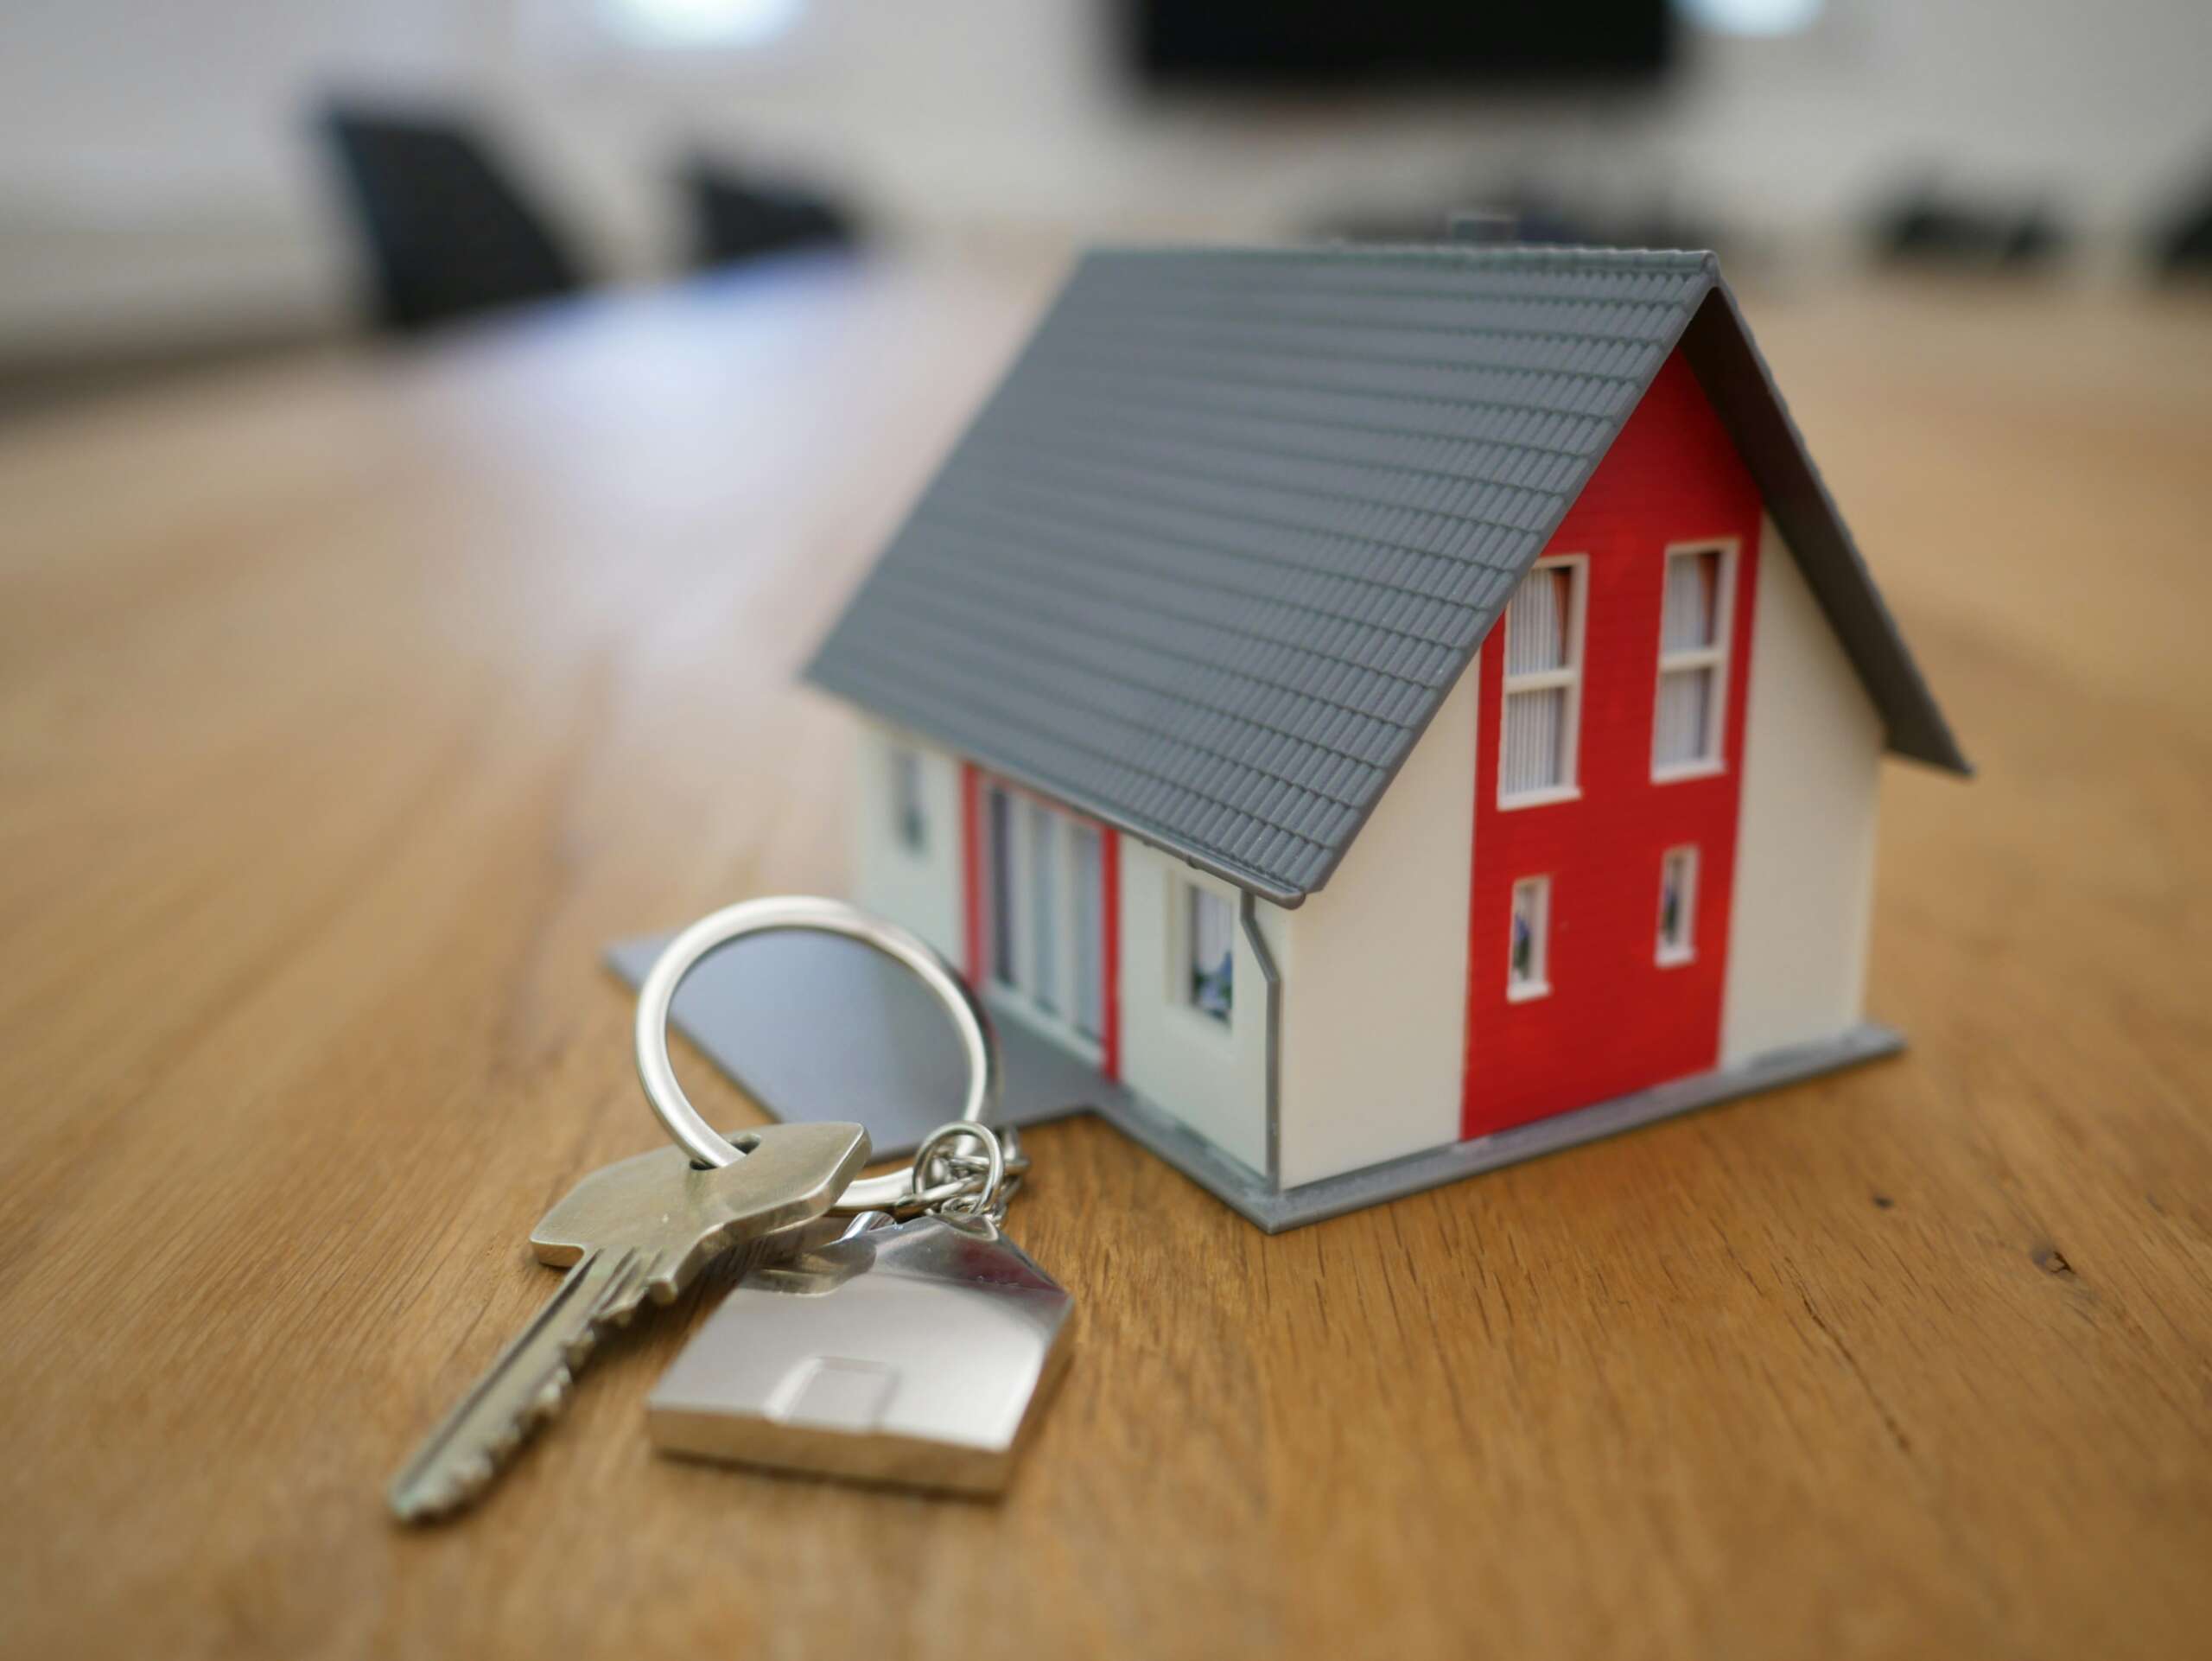 An image of a mini house attached to a keychain.